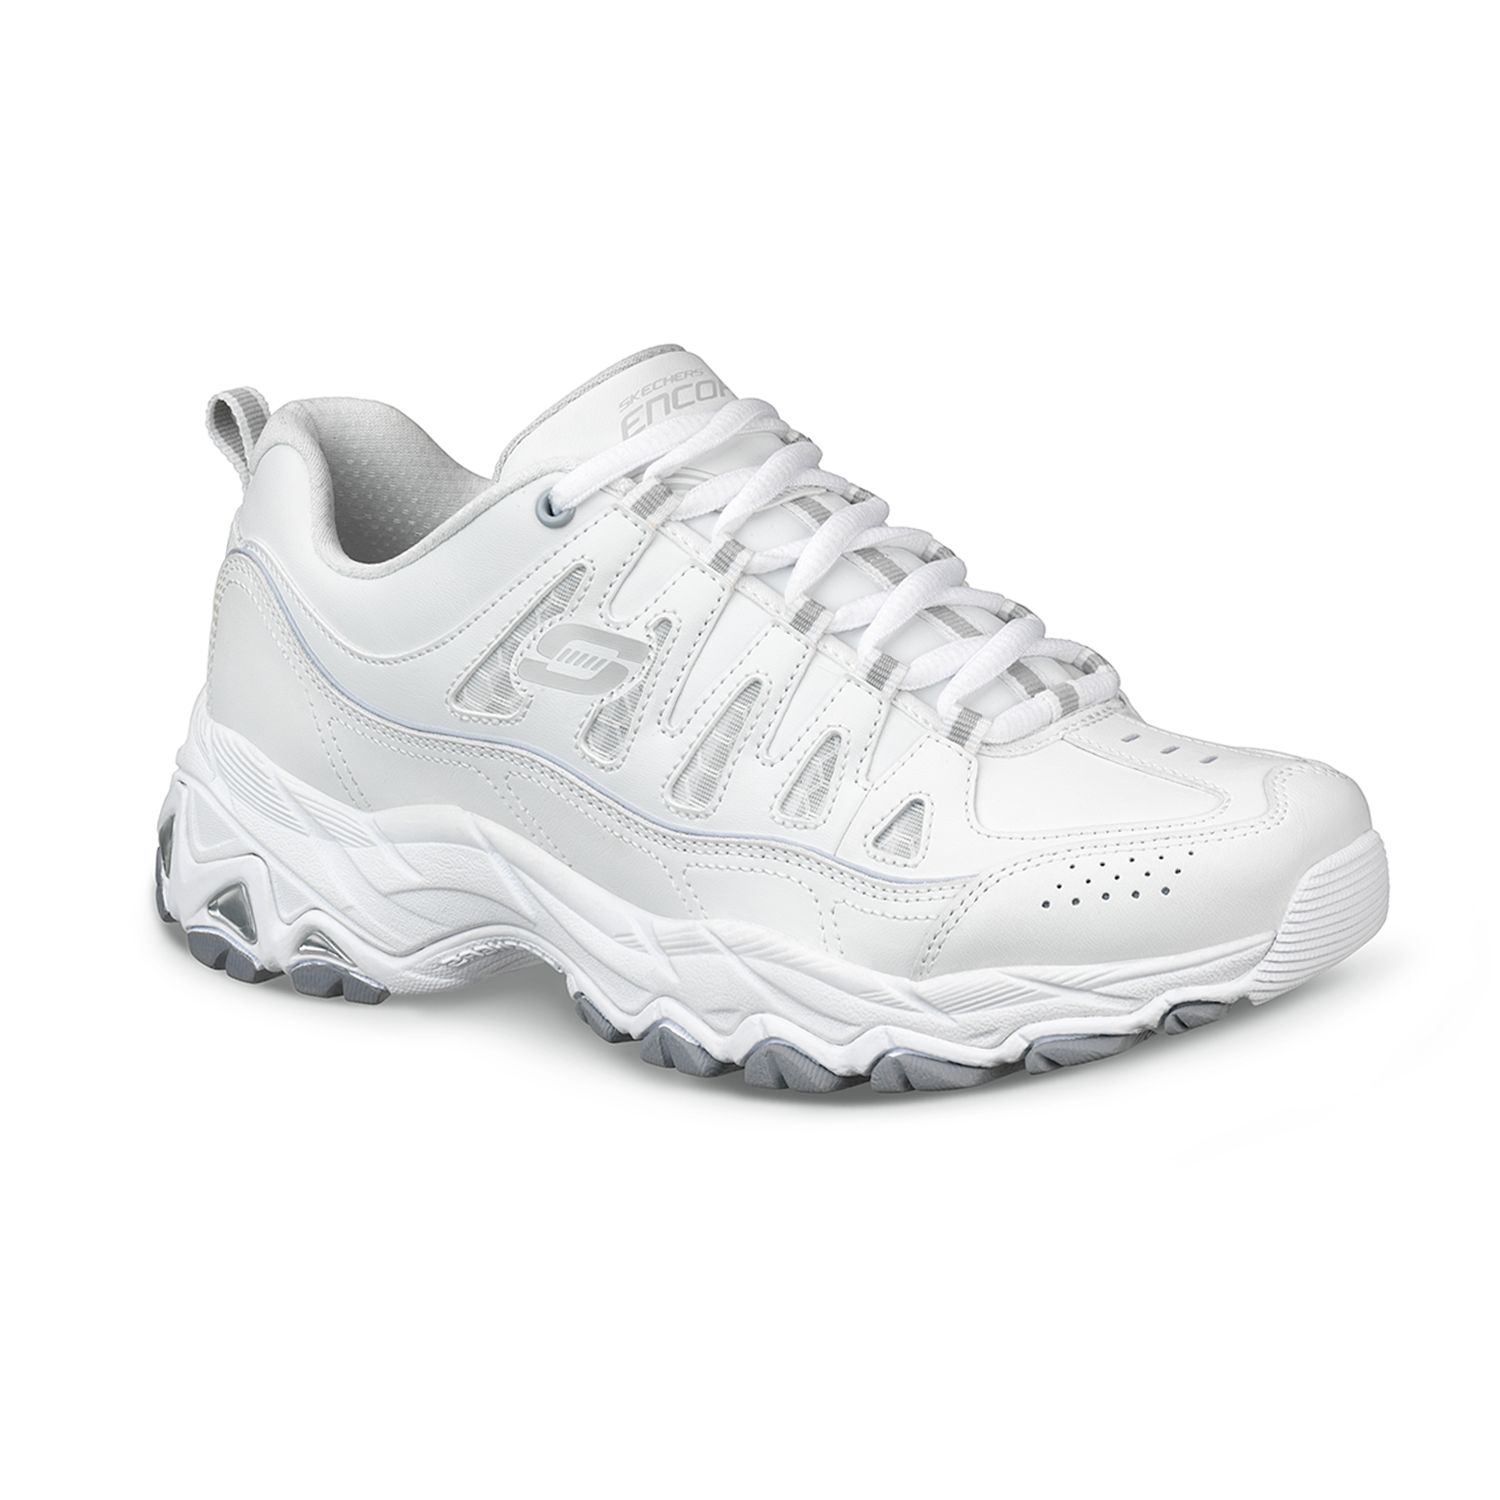 skechers tennis shoes at kohl's